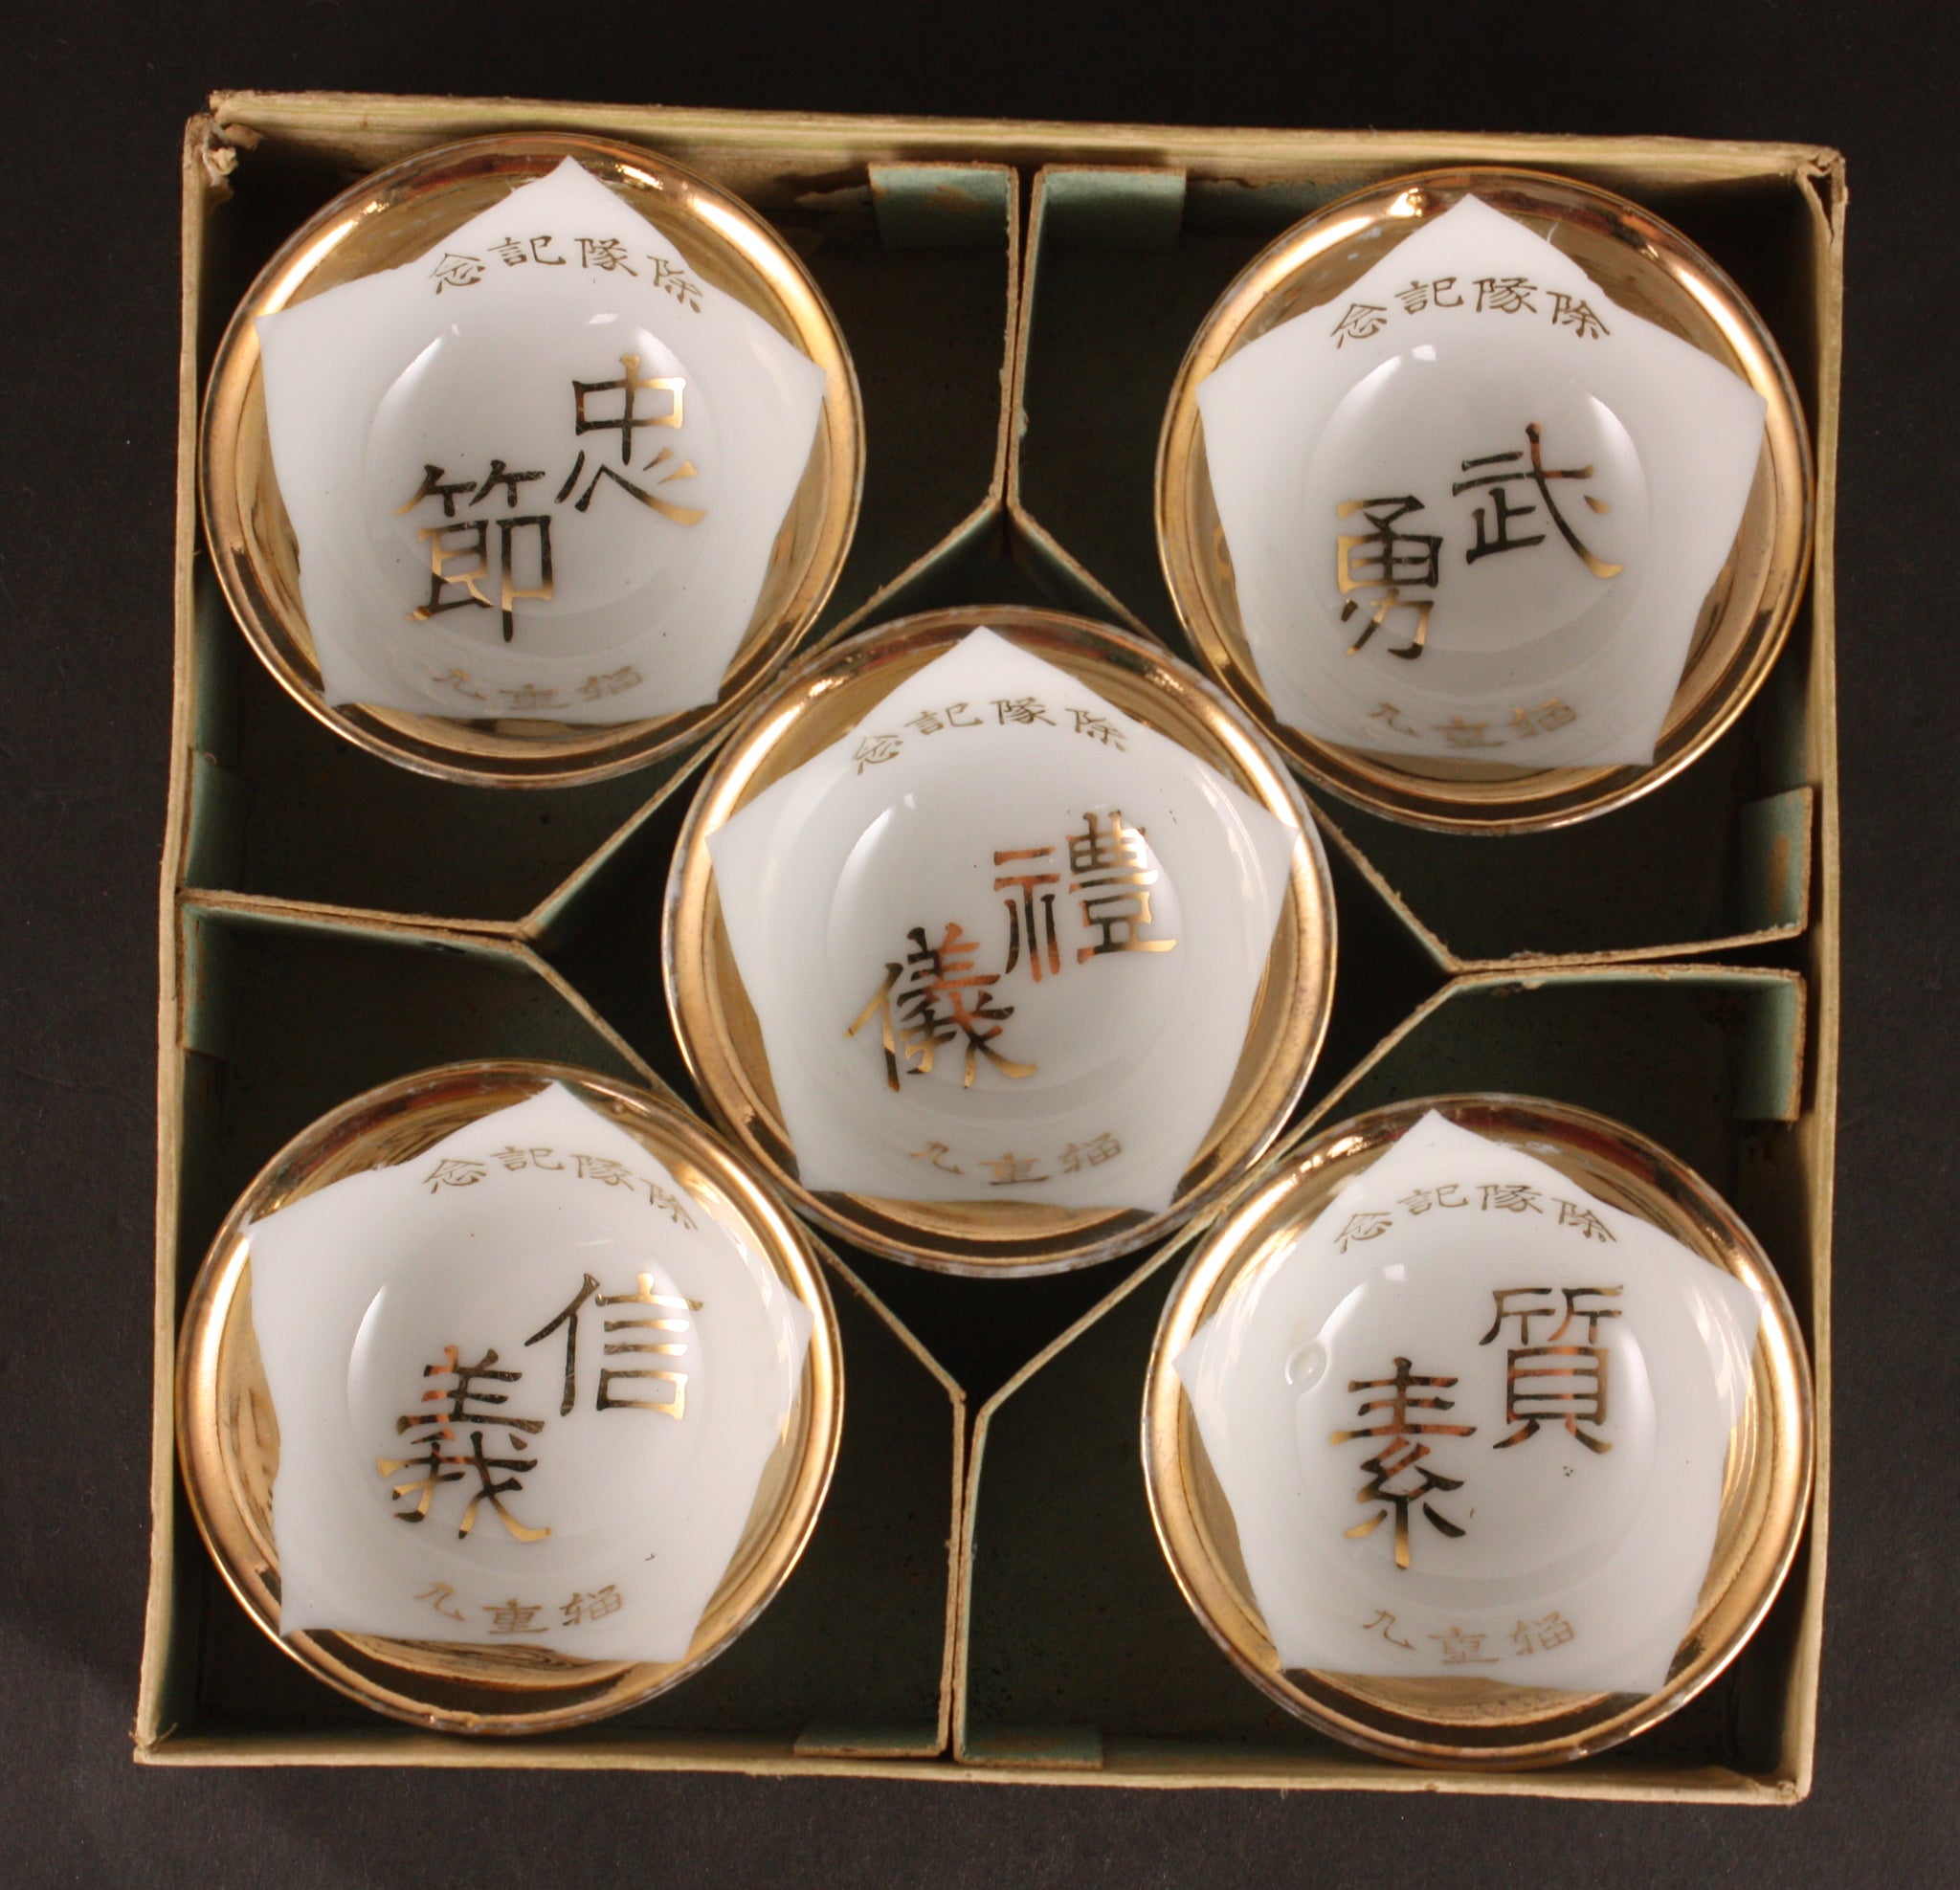 Rare Set of 5 Antique Japanese Military Five Virtues Helmet Army Sake Cup